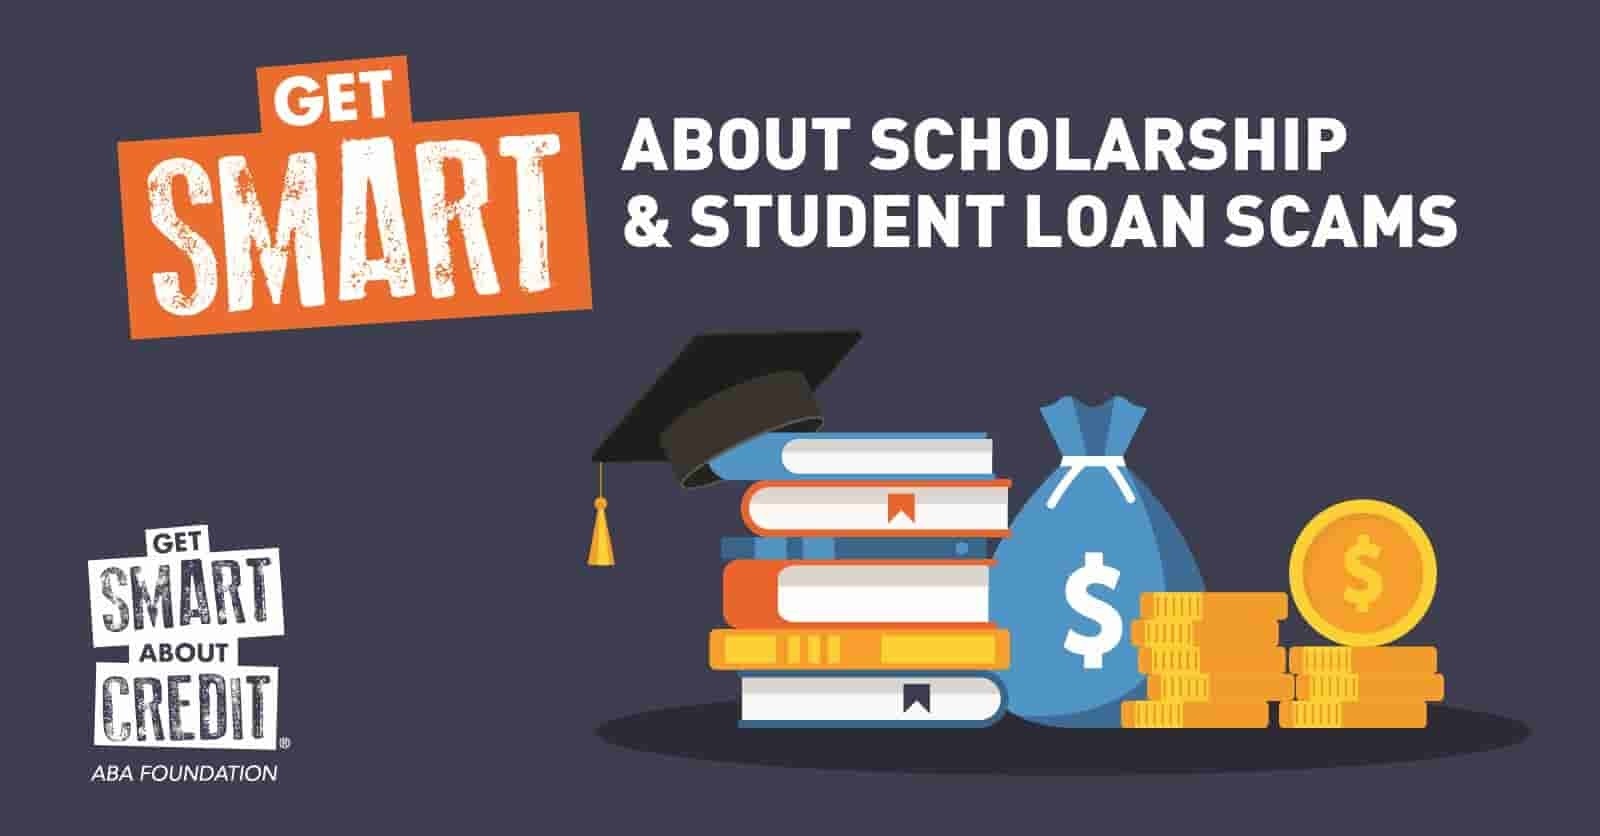 Get smart about scholarship & student loan scams image